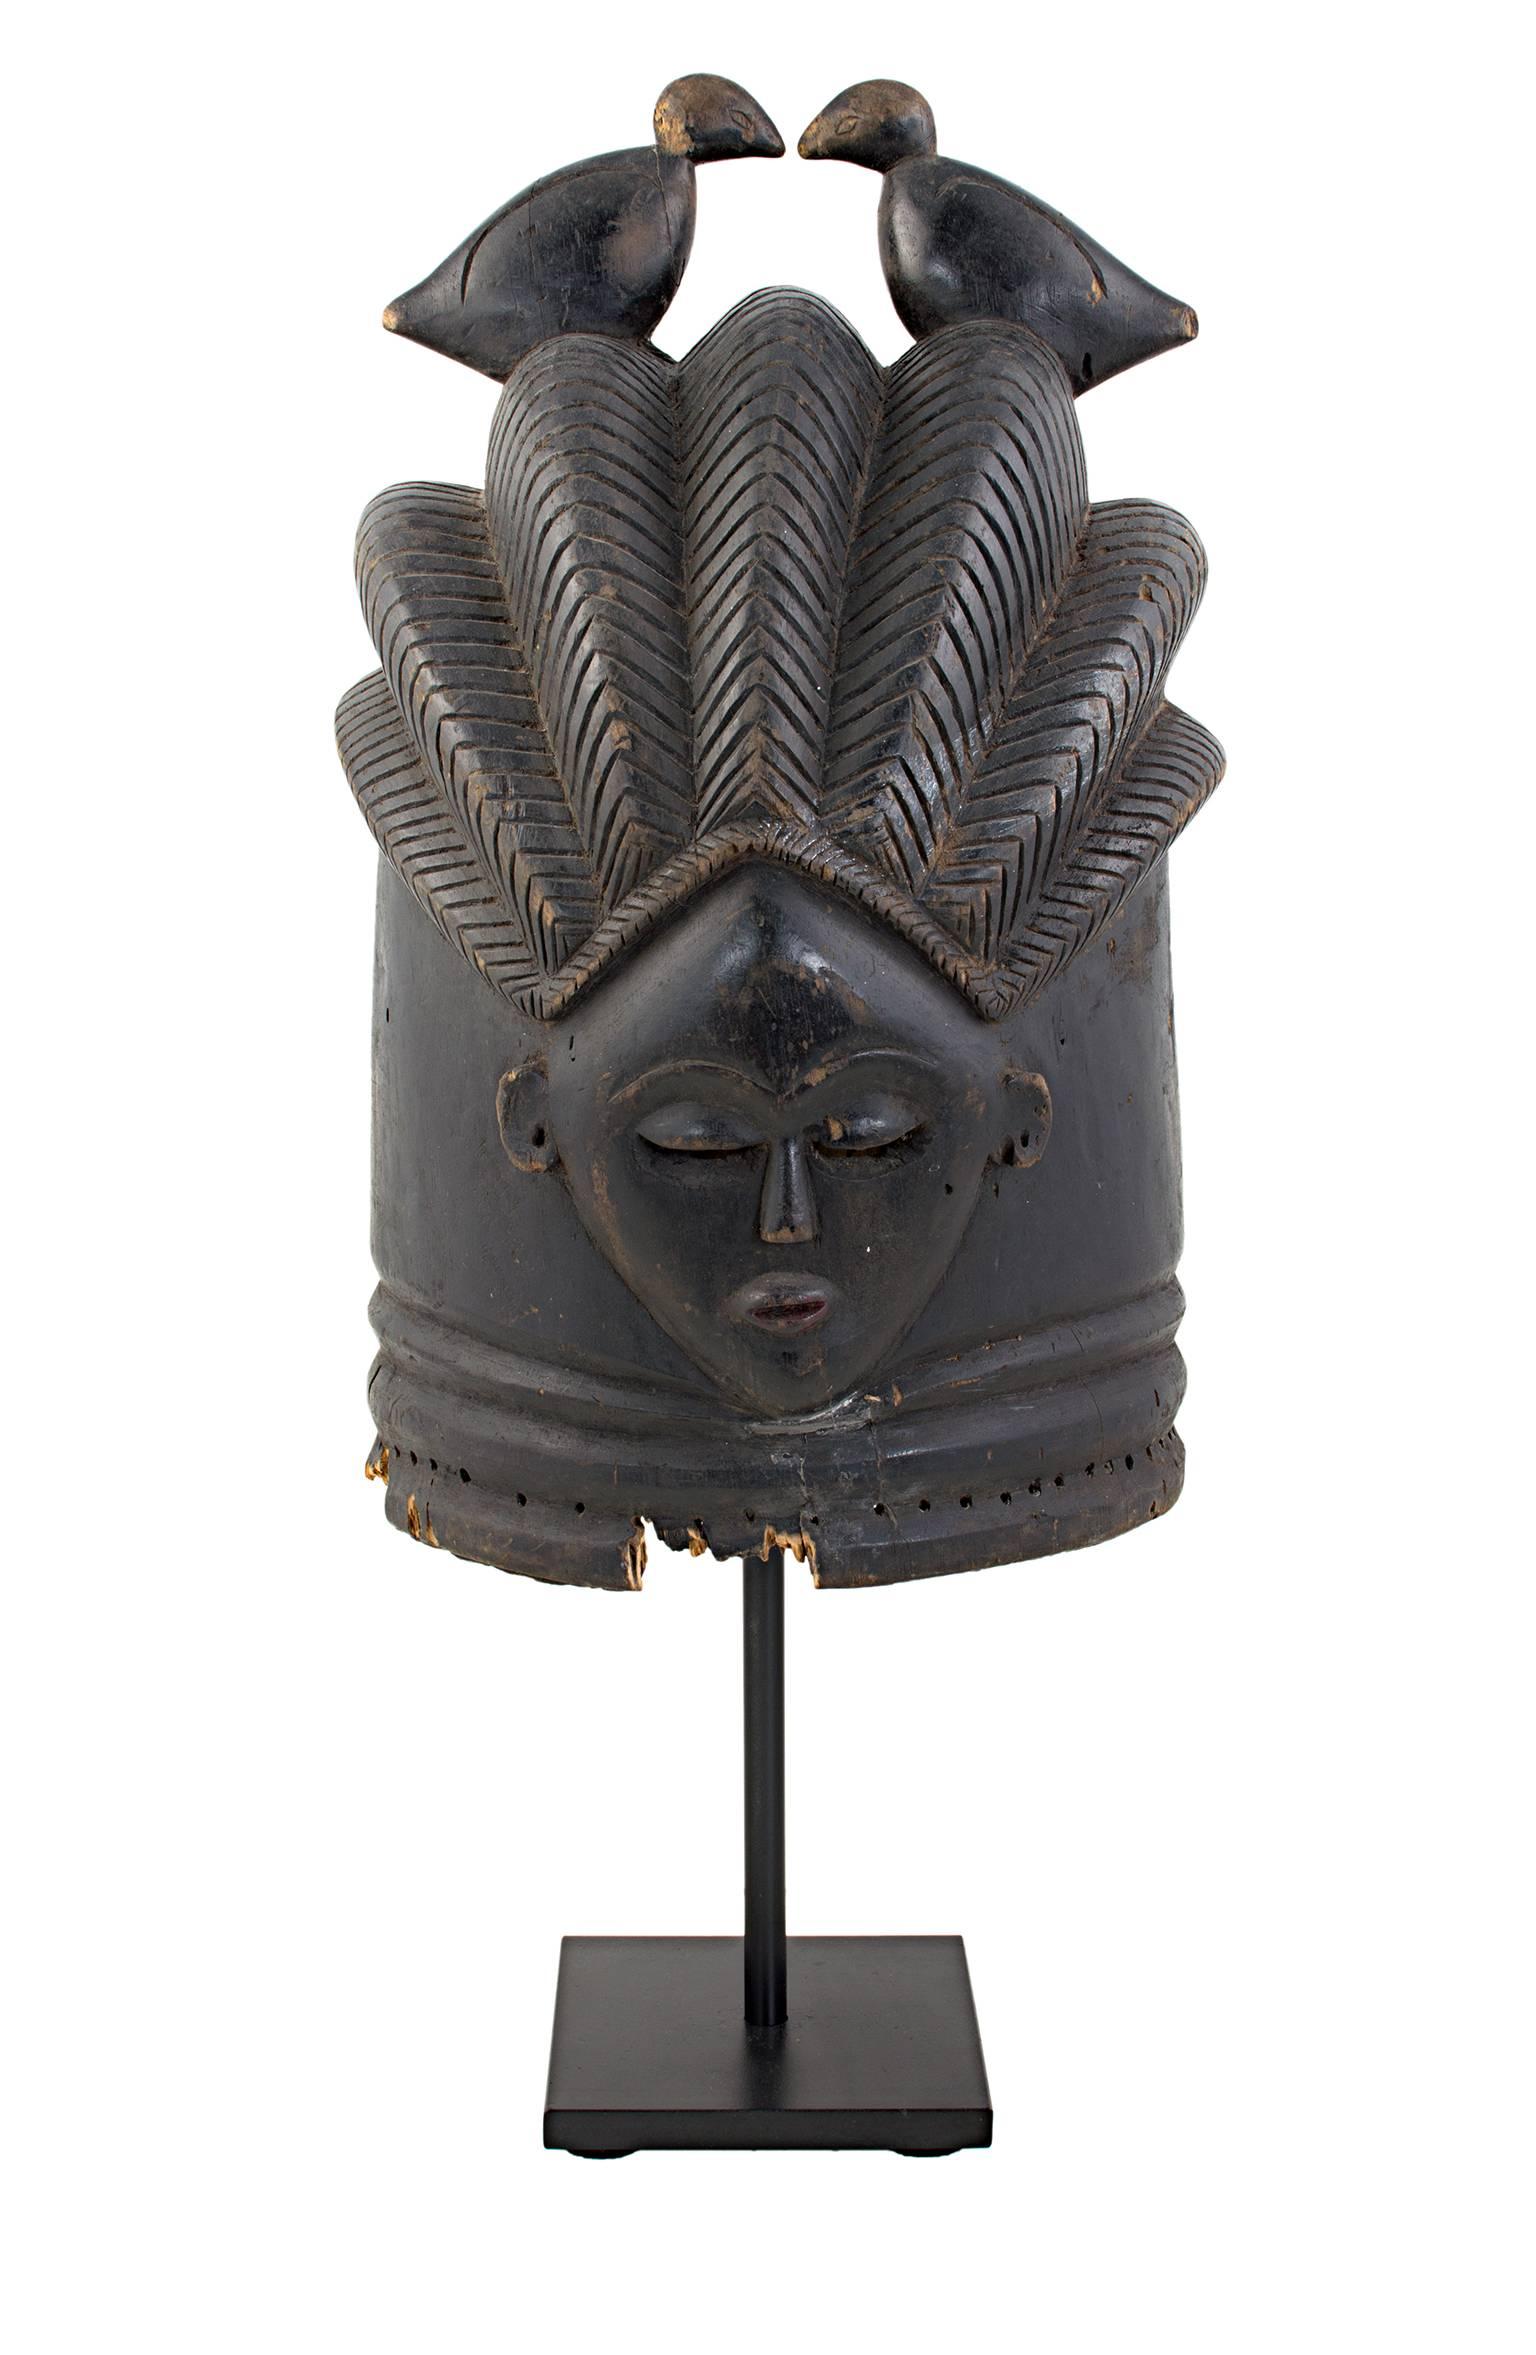 Unknown Figurative Sculpture - "Mende Mask, " Carved Wooden Mask created in Sierra Leone c. 1930